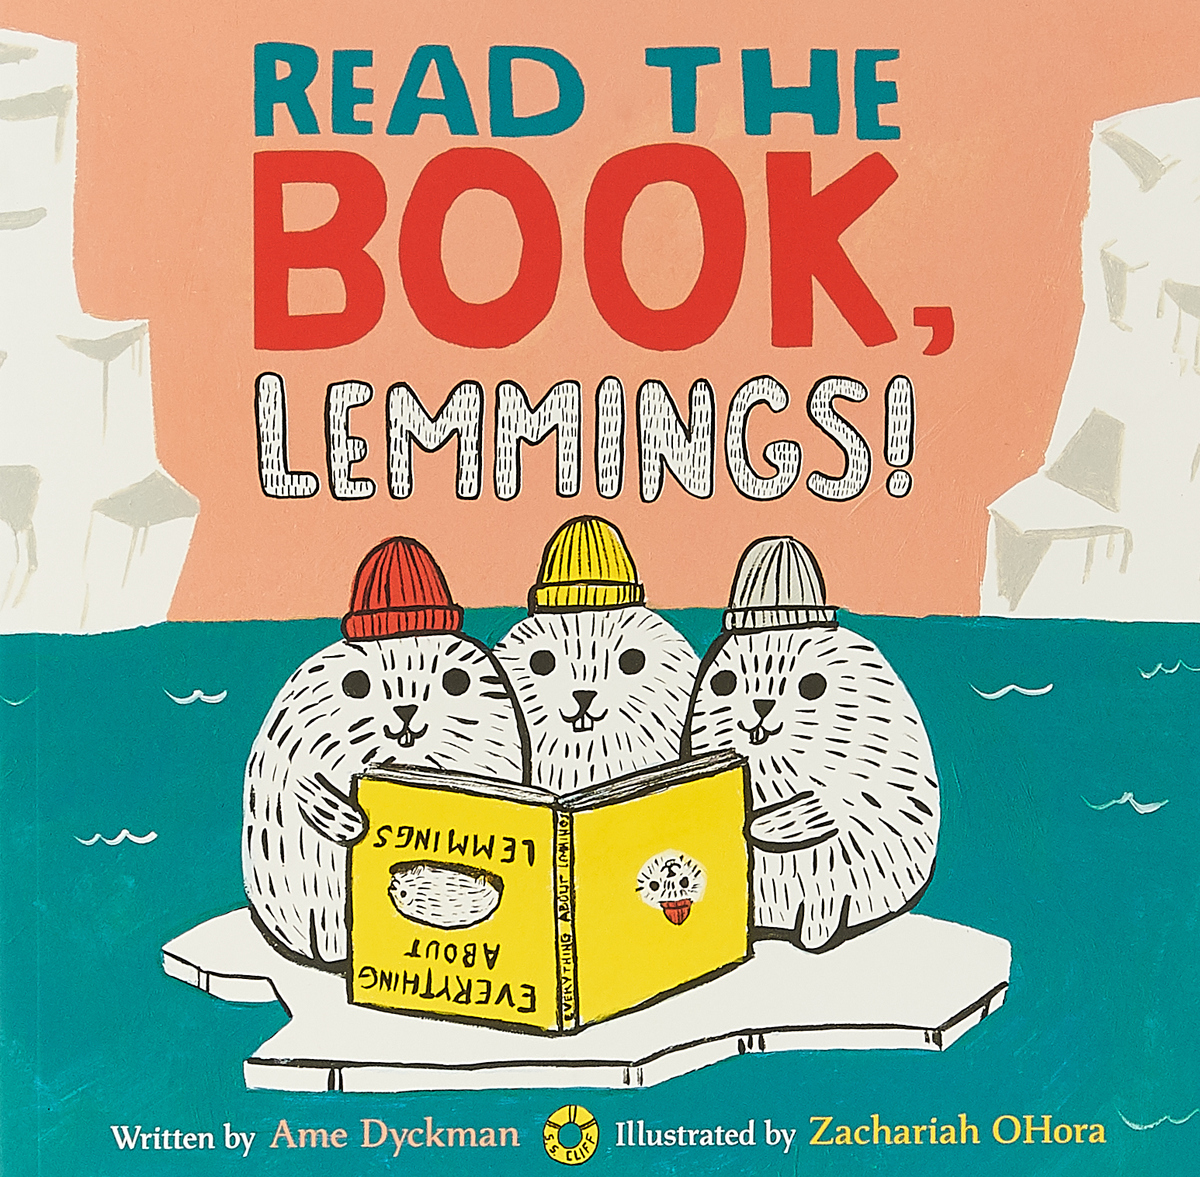 READ THE BOOK, LEMMINGS!